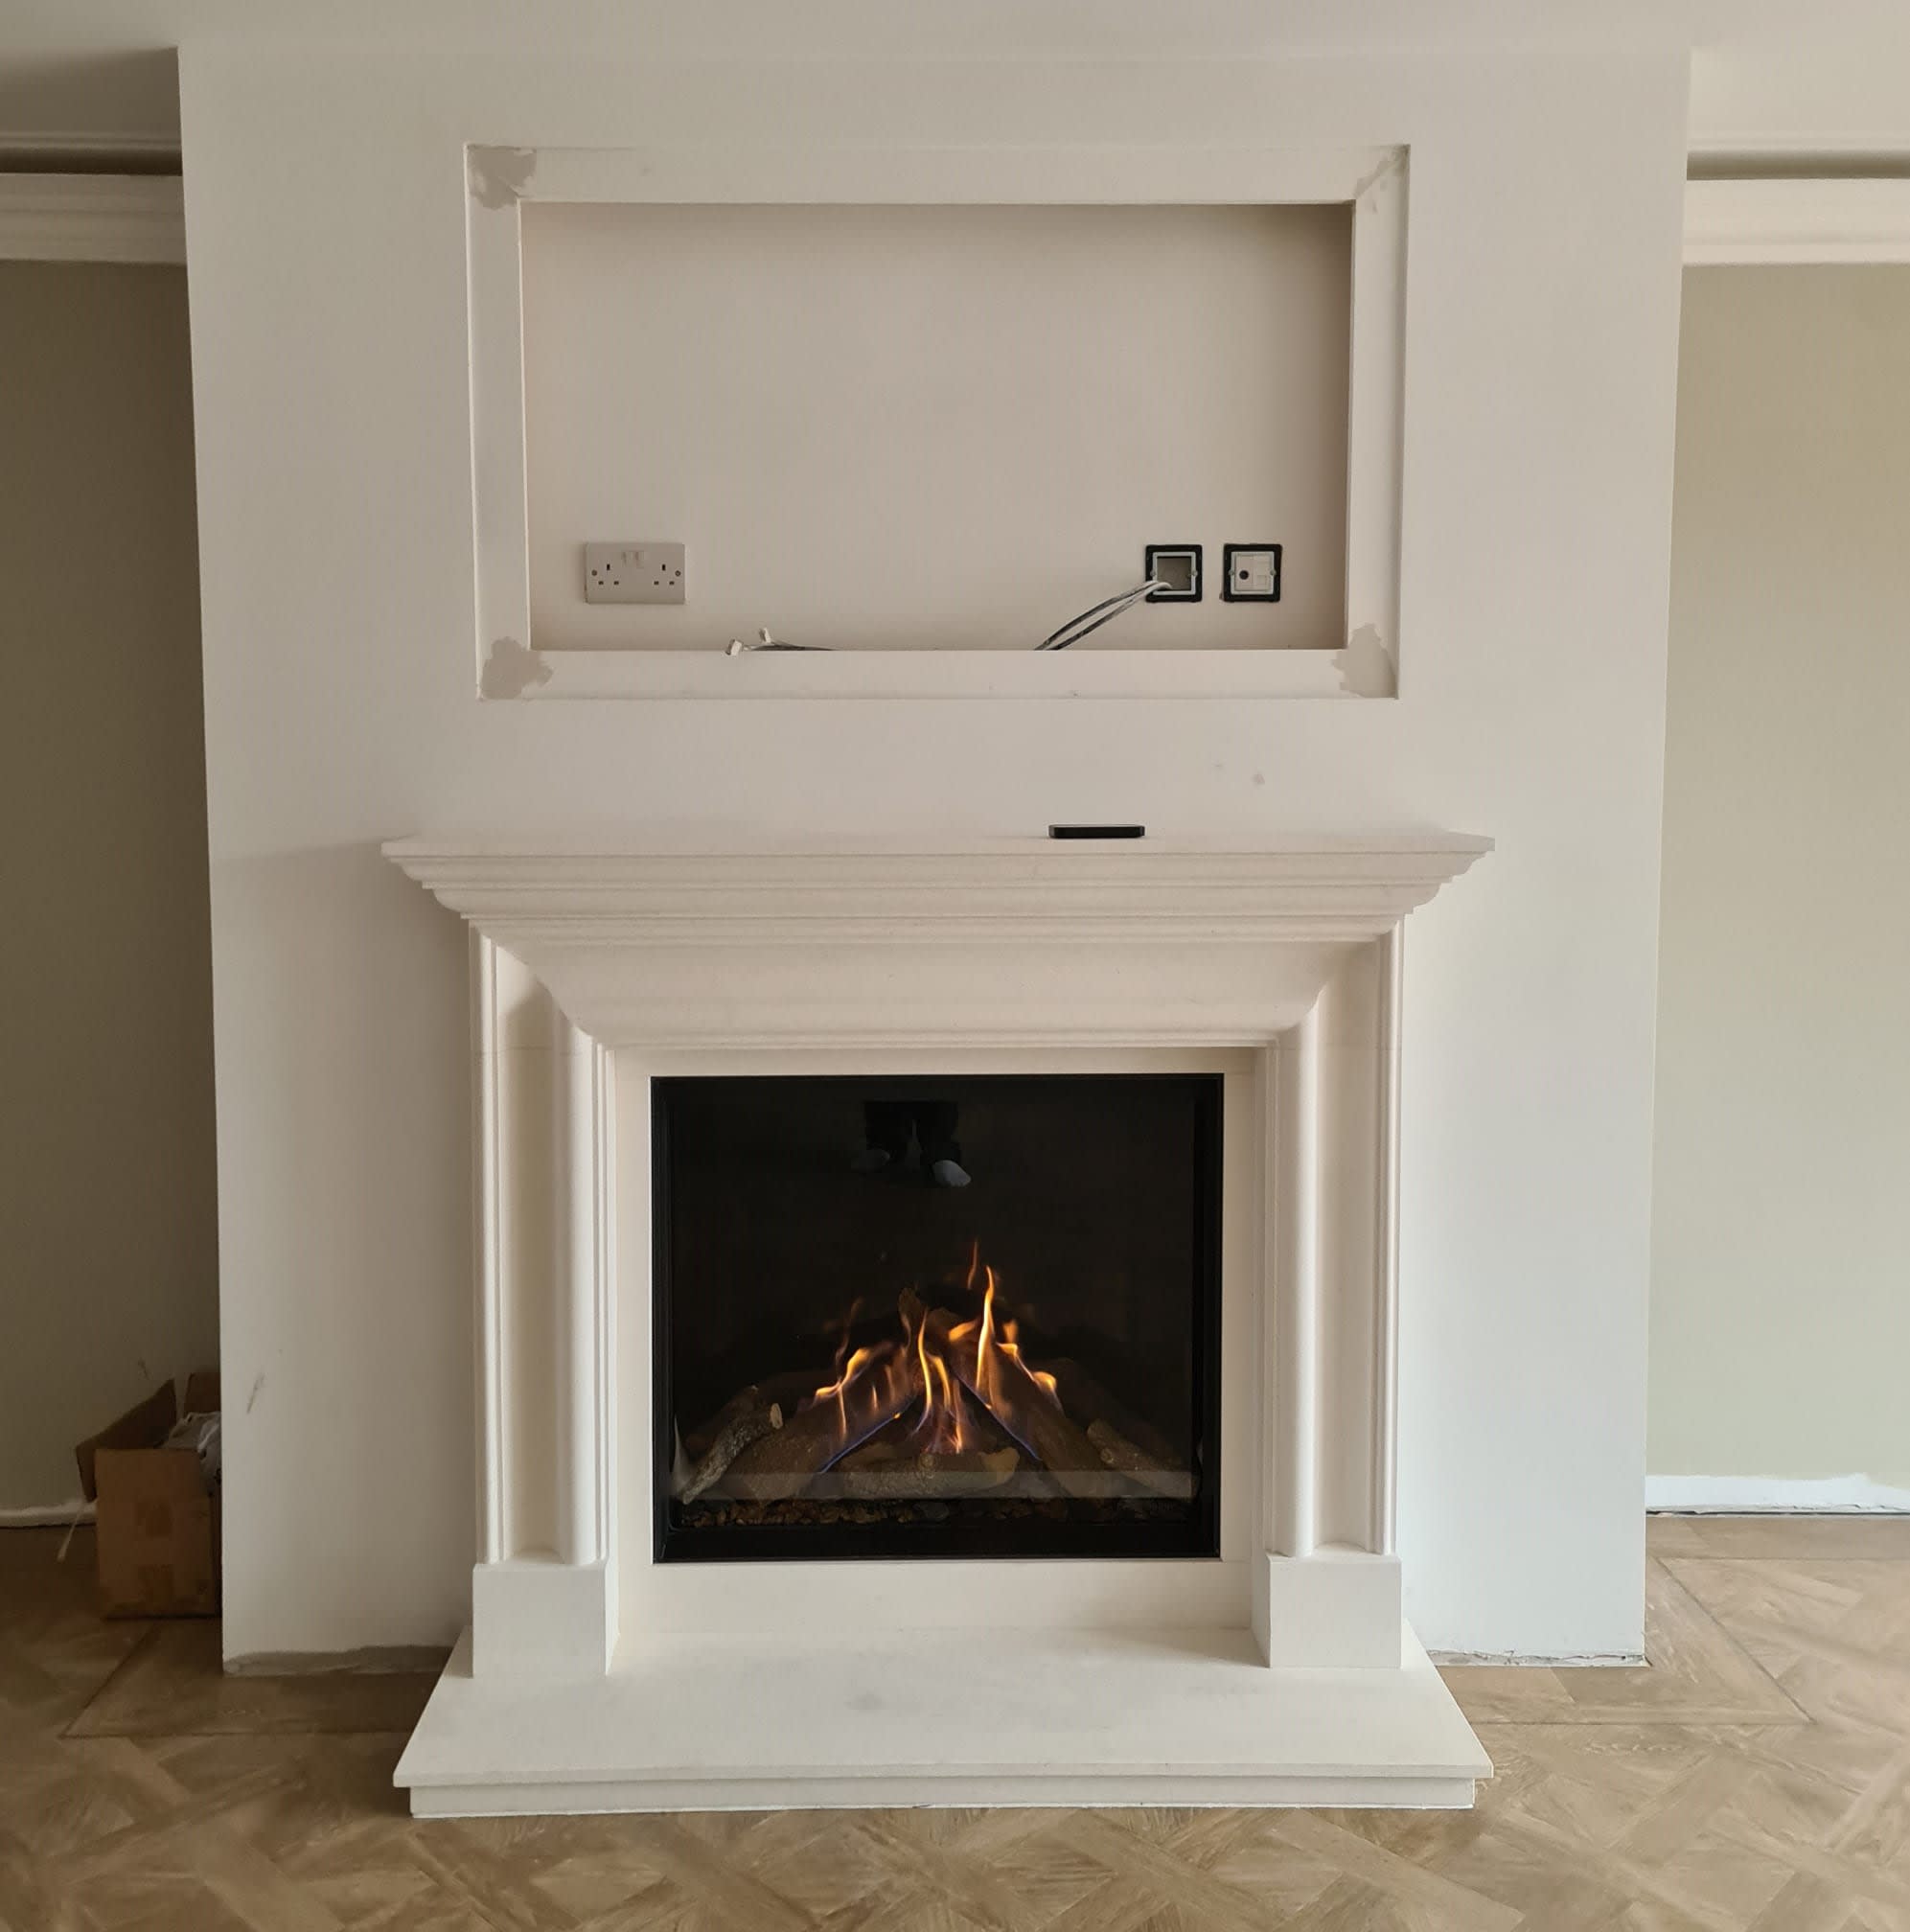 Images The Fireplace Room Ltd